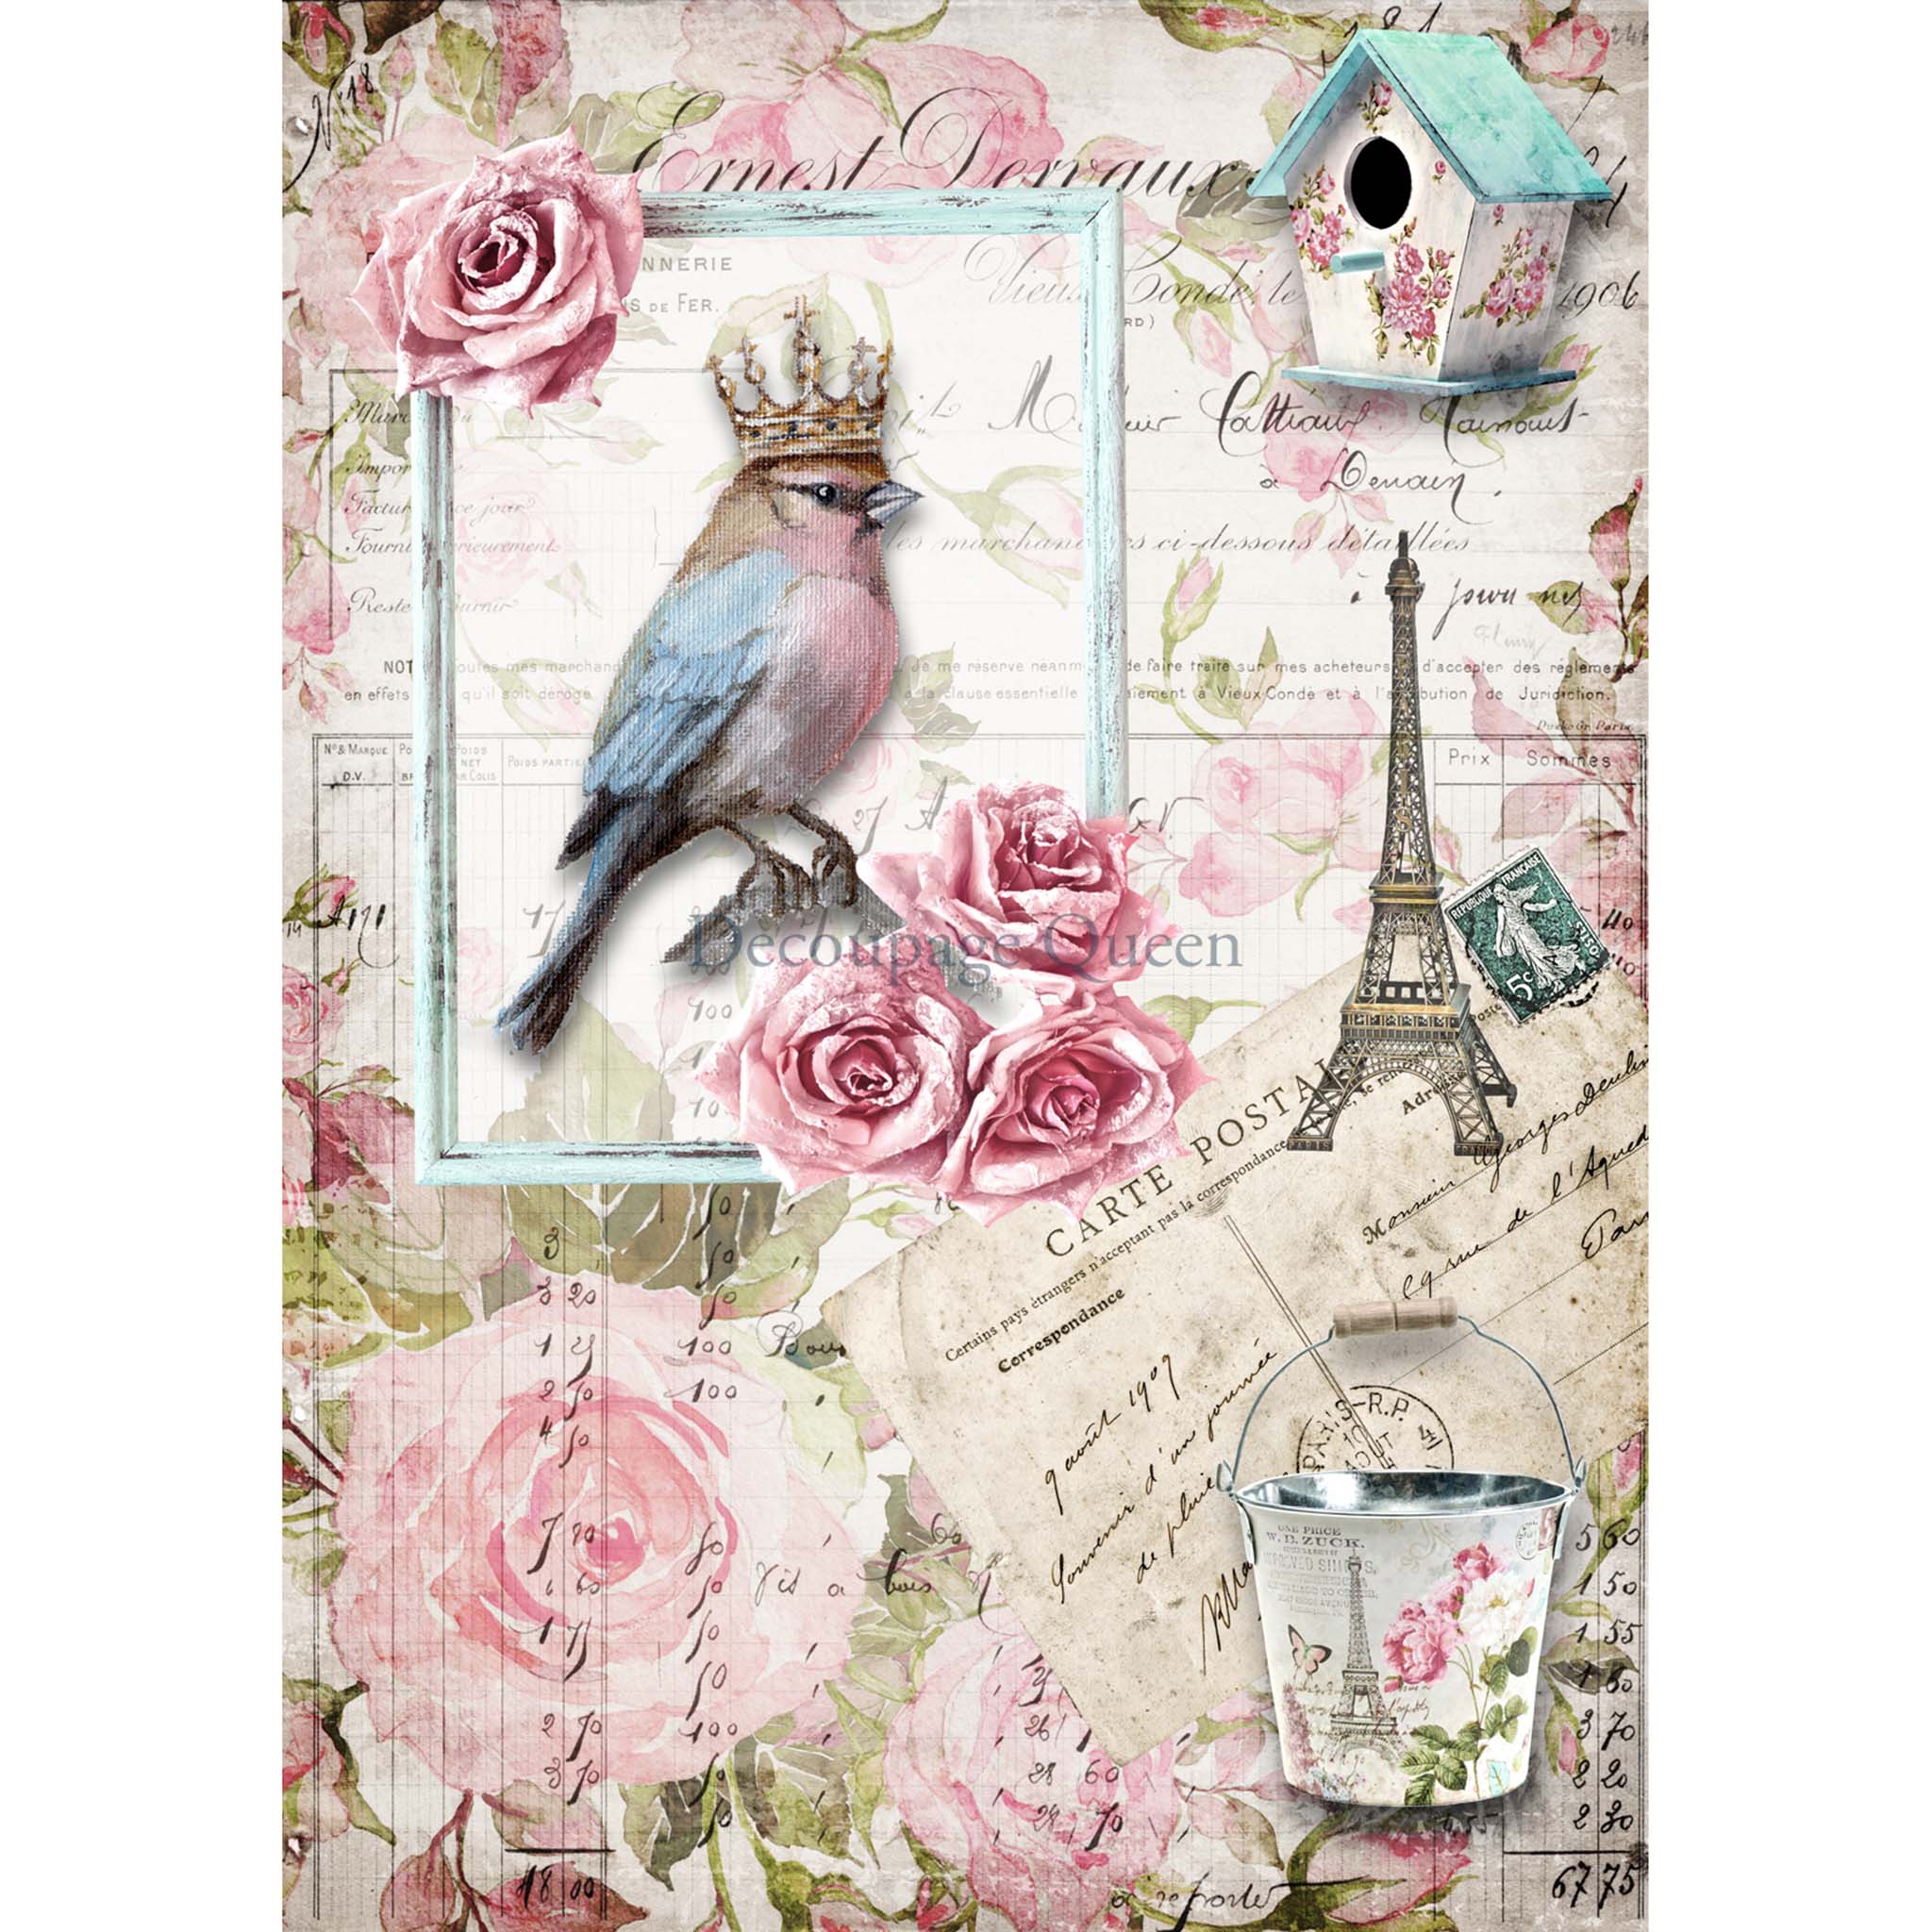 A0 rice paper design that features a small bird wearing a crown perched in a picture frame, surrounded by iconic Parisian elements like the Eiffel Tower, a birdhouse, and a French postcard against a floral background. White borders are on the sides.